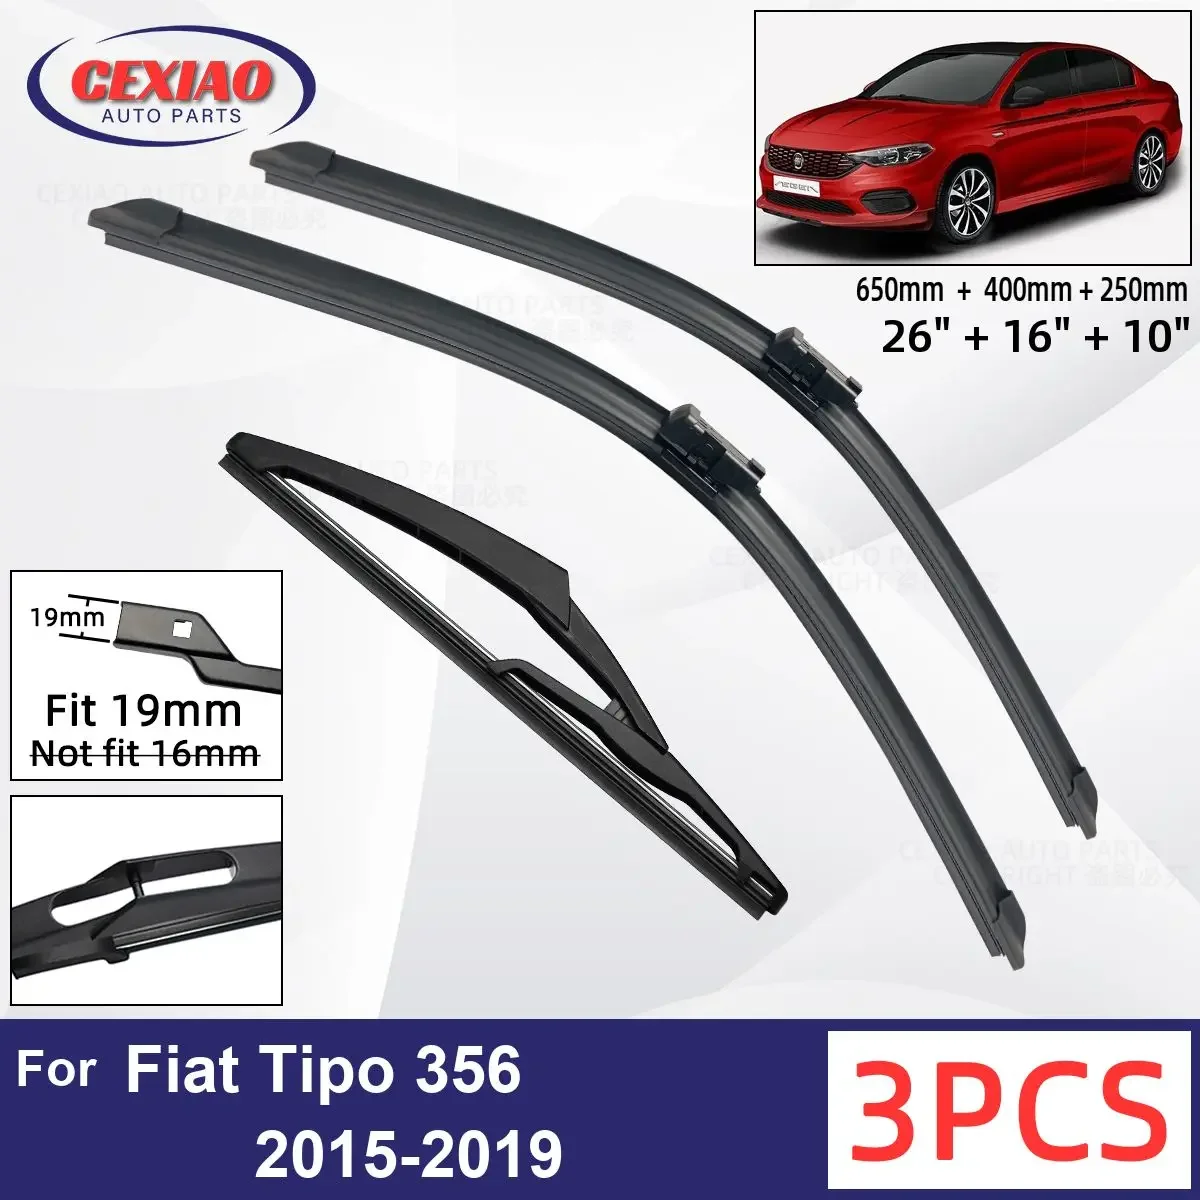 

For Fiat Tipo 356 2015-2019 Car Front Rear Wiper Blades Soft Rubber Windscreen Wipers Auto Windshield 26"+16"+10" 2016 2017 2018